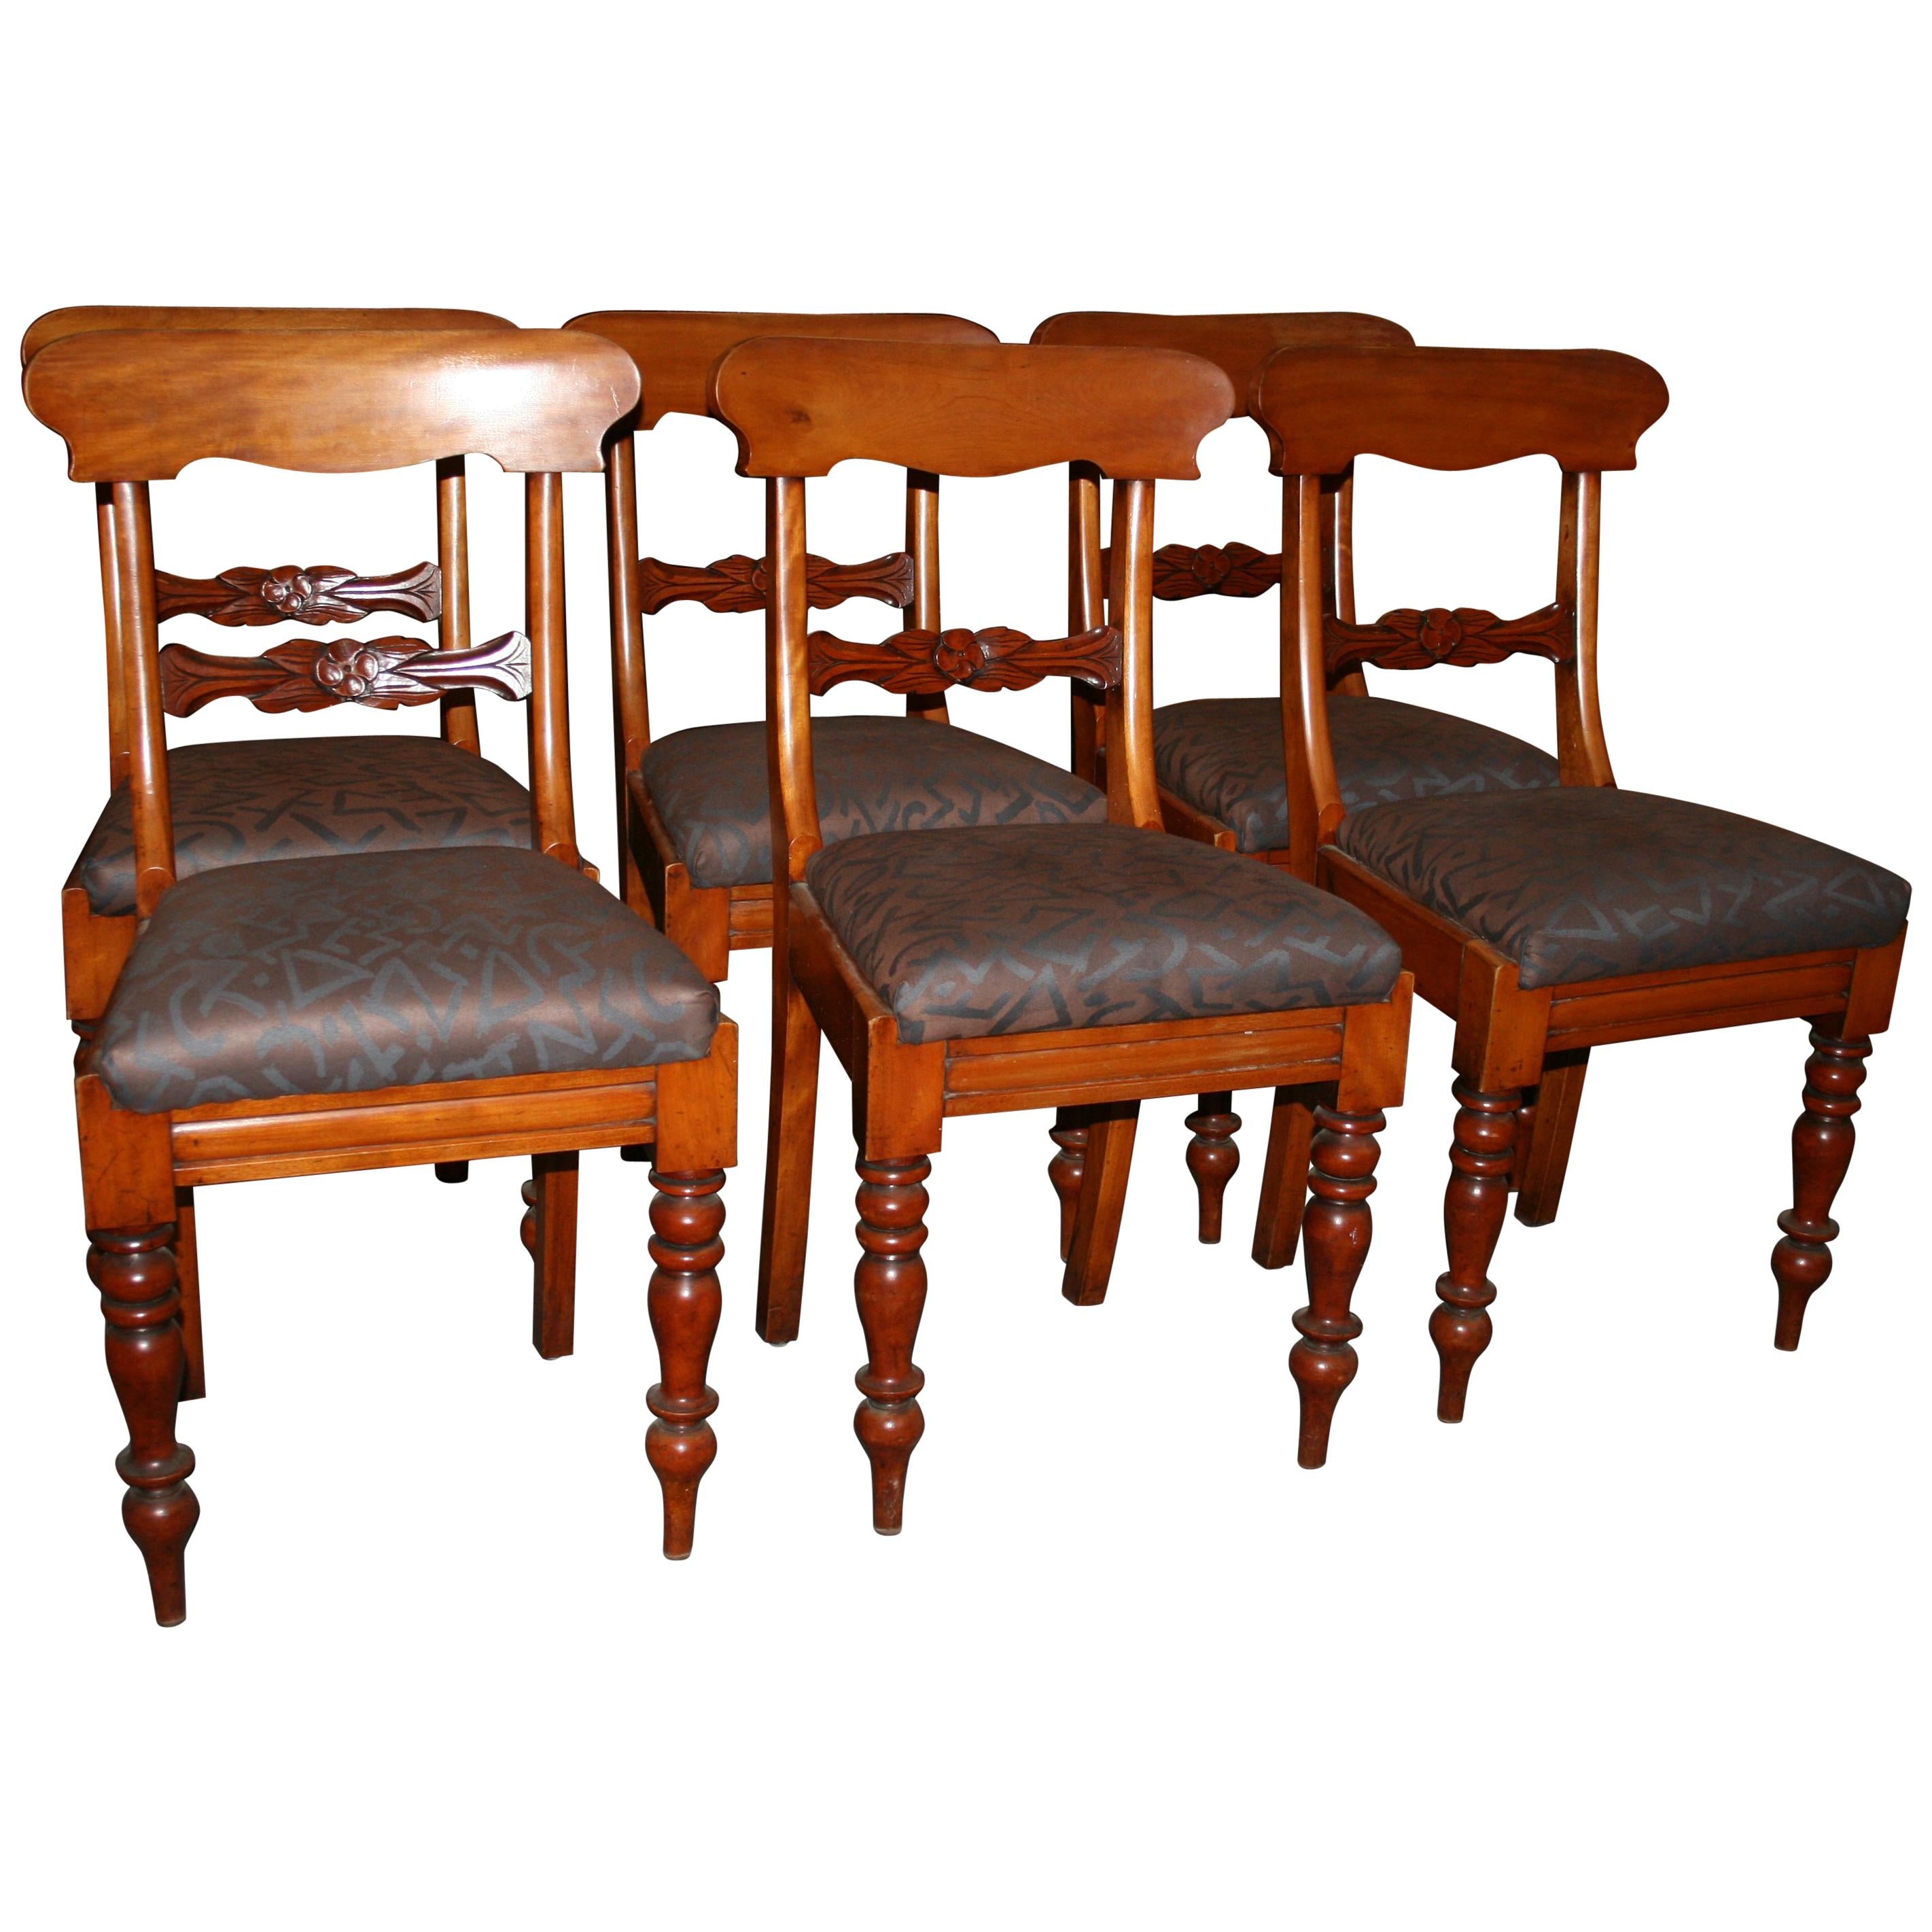 Antique Dining Room Chair Group, Set of 6